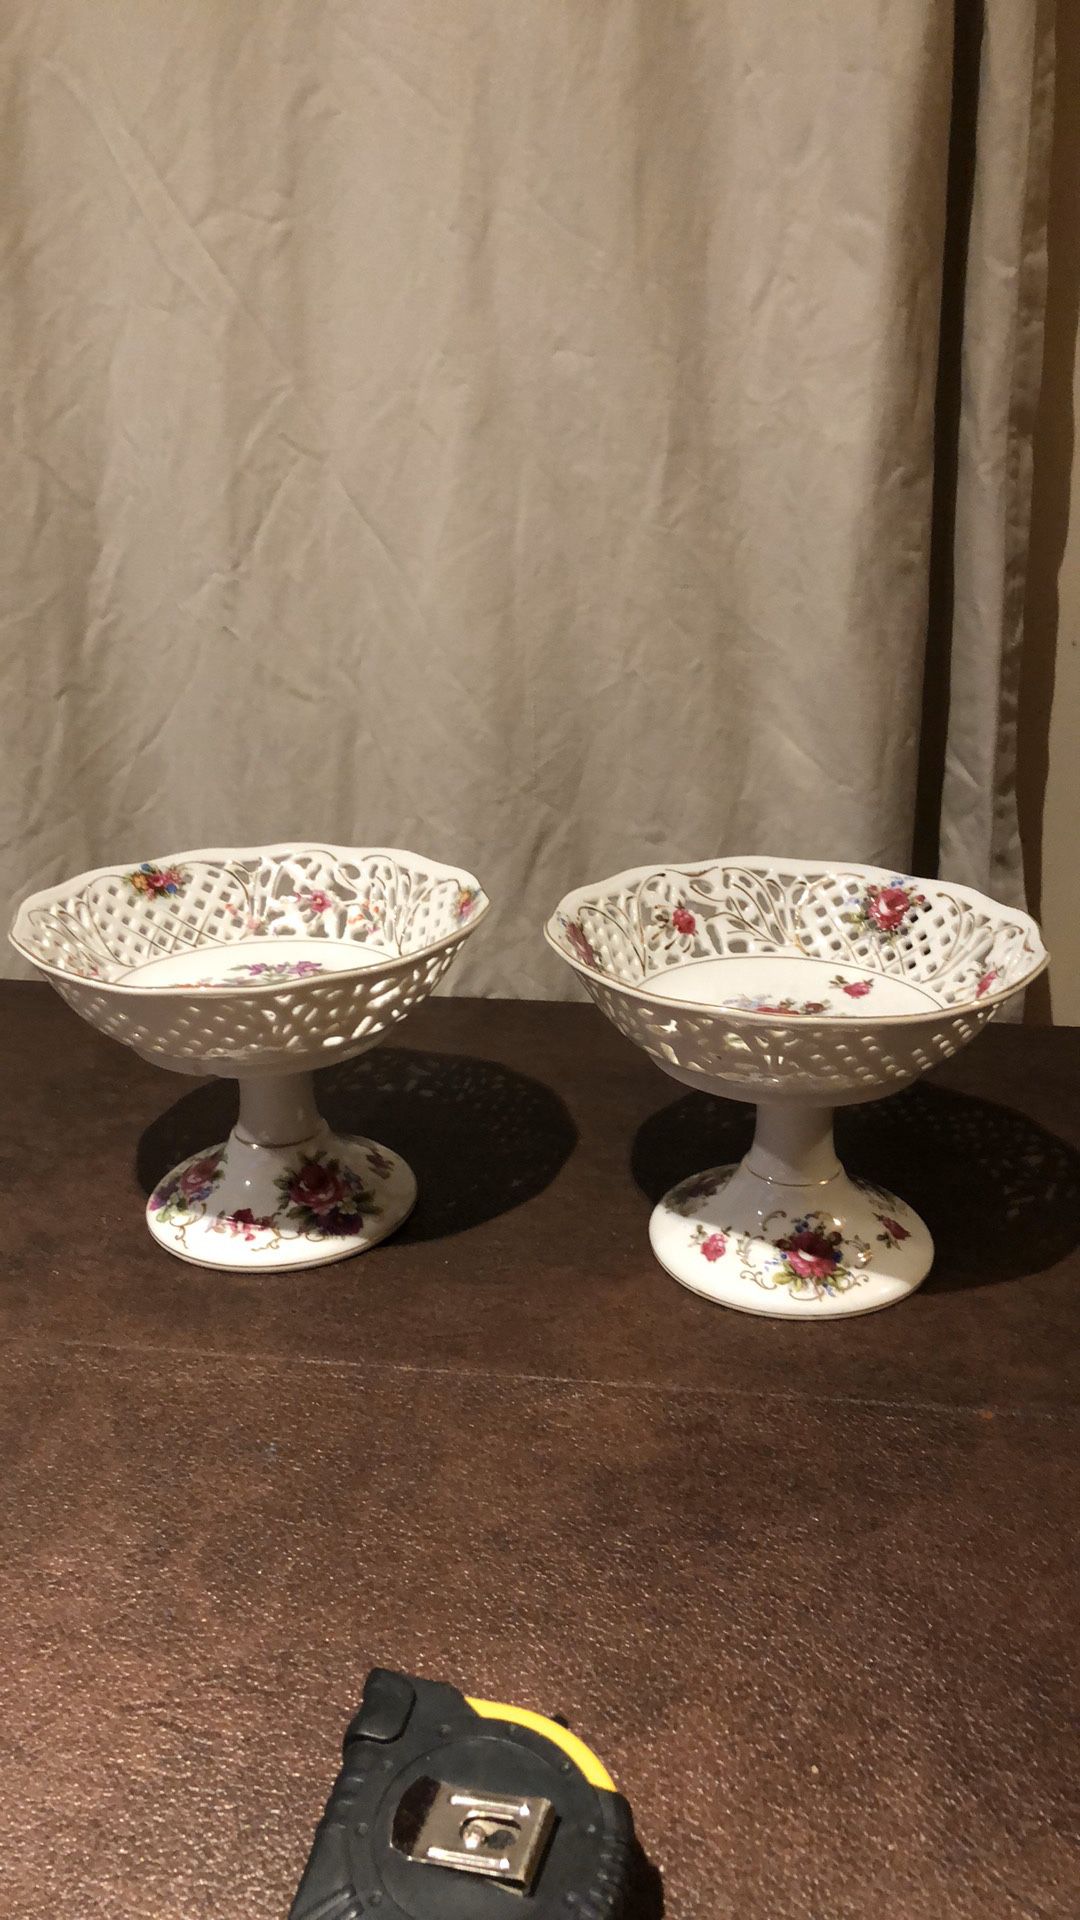 Decor plates with stands